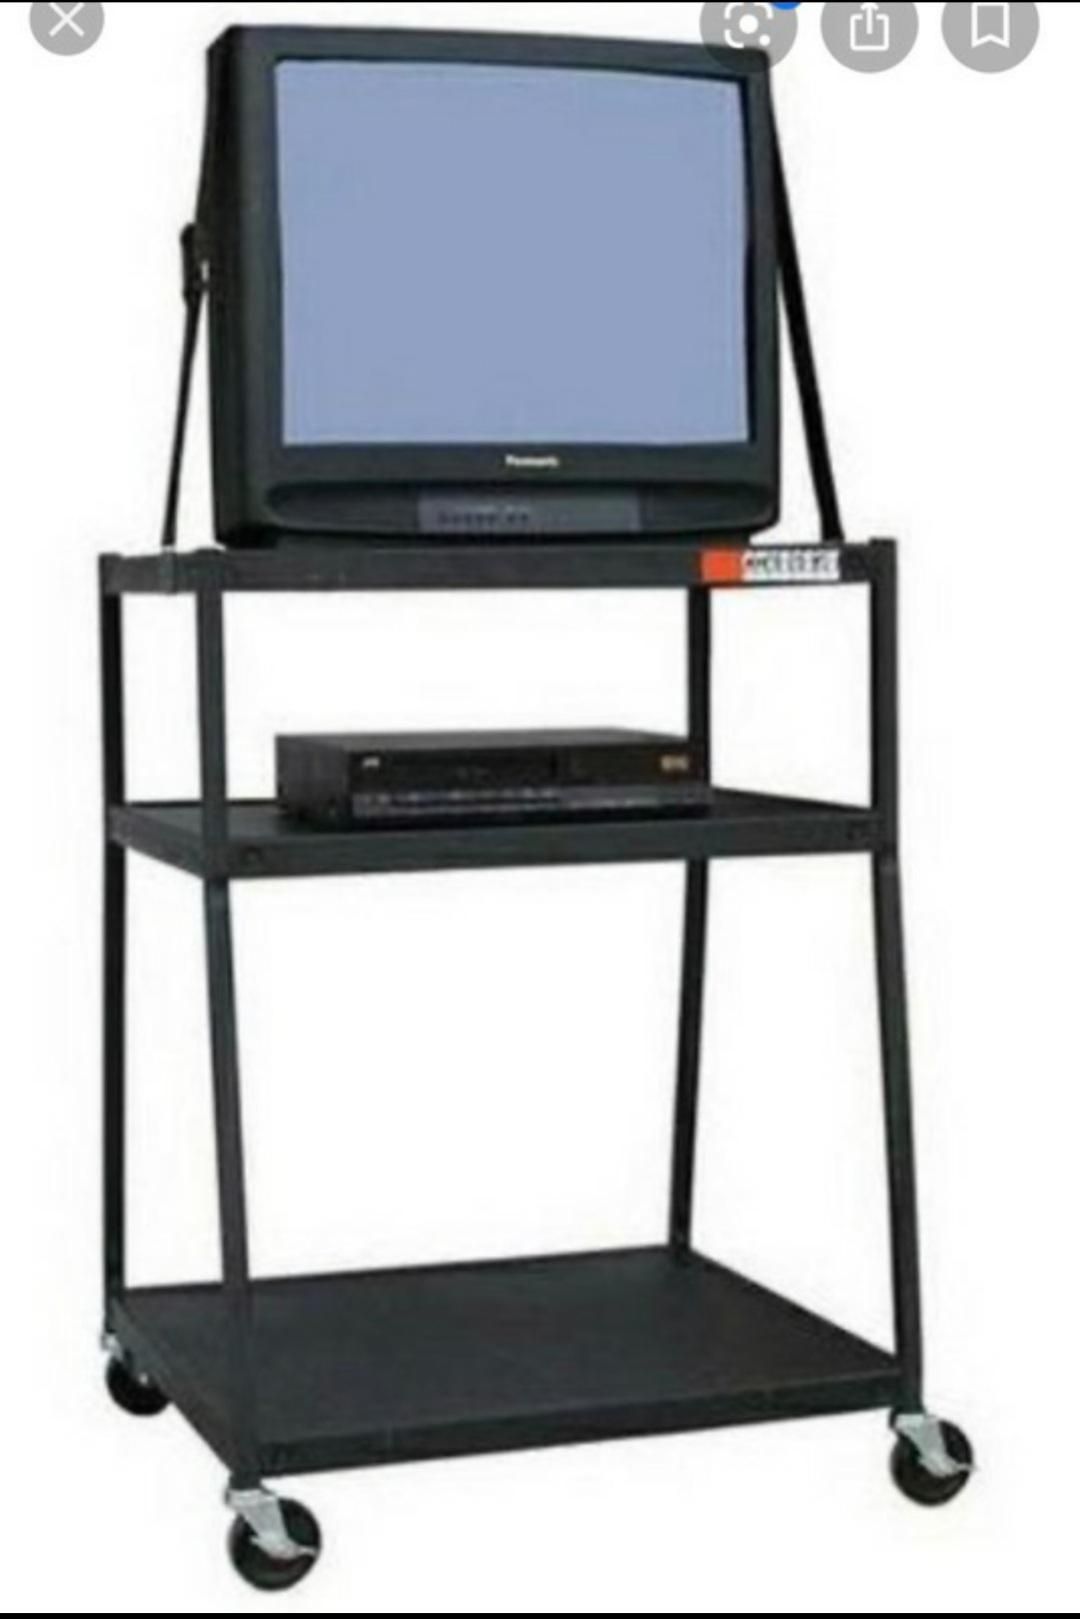 You know it's going to be a good school day seeing one of these in the front of the classroom.